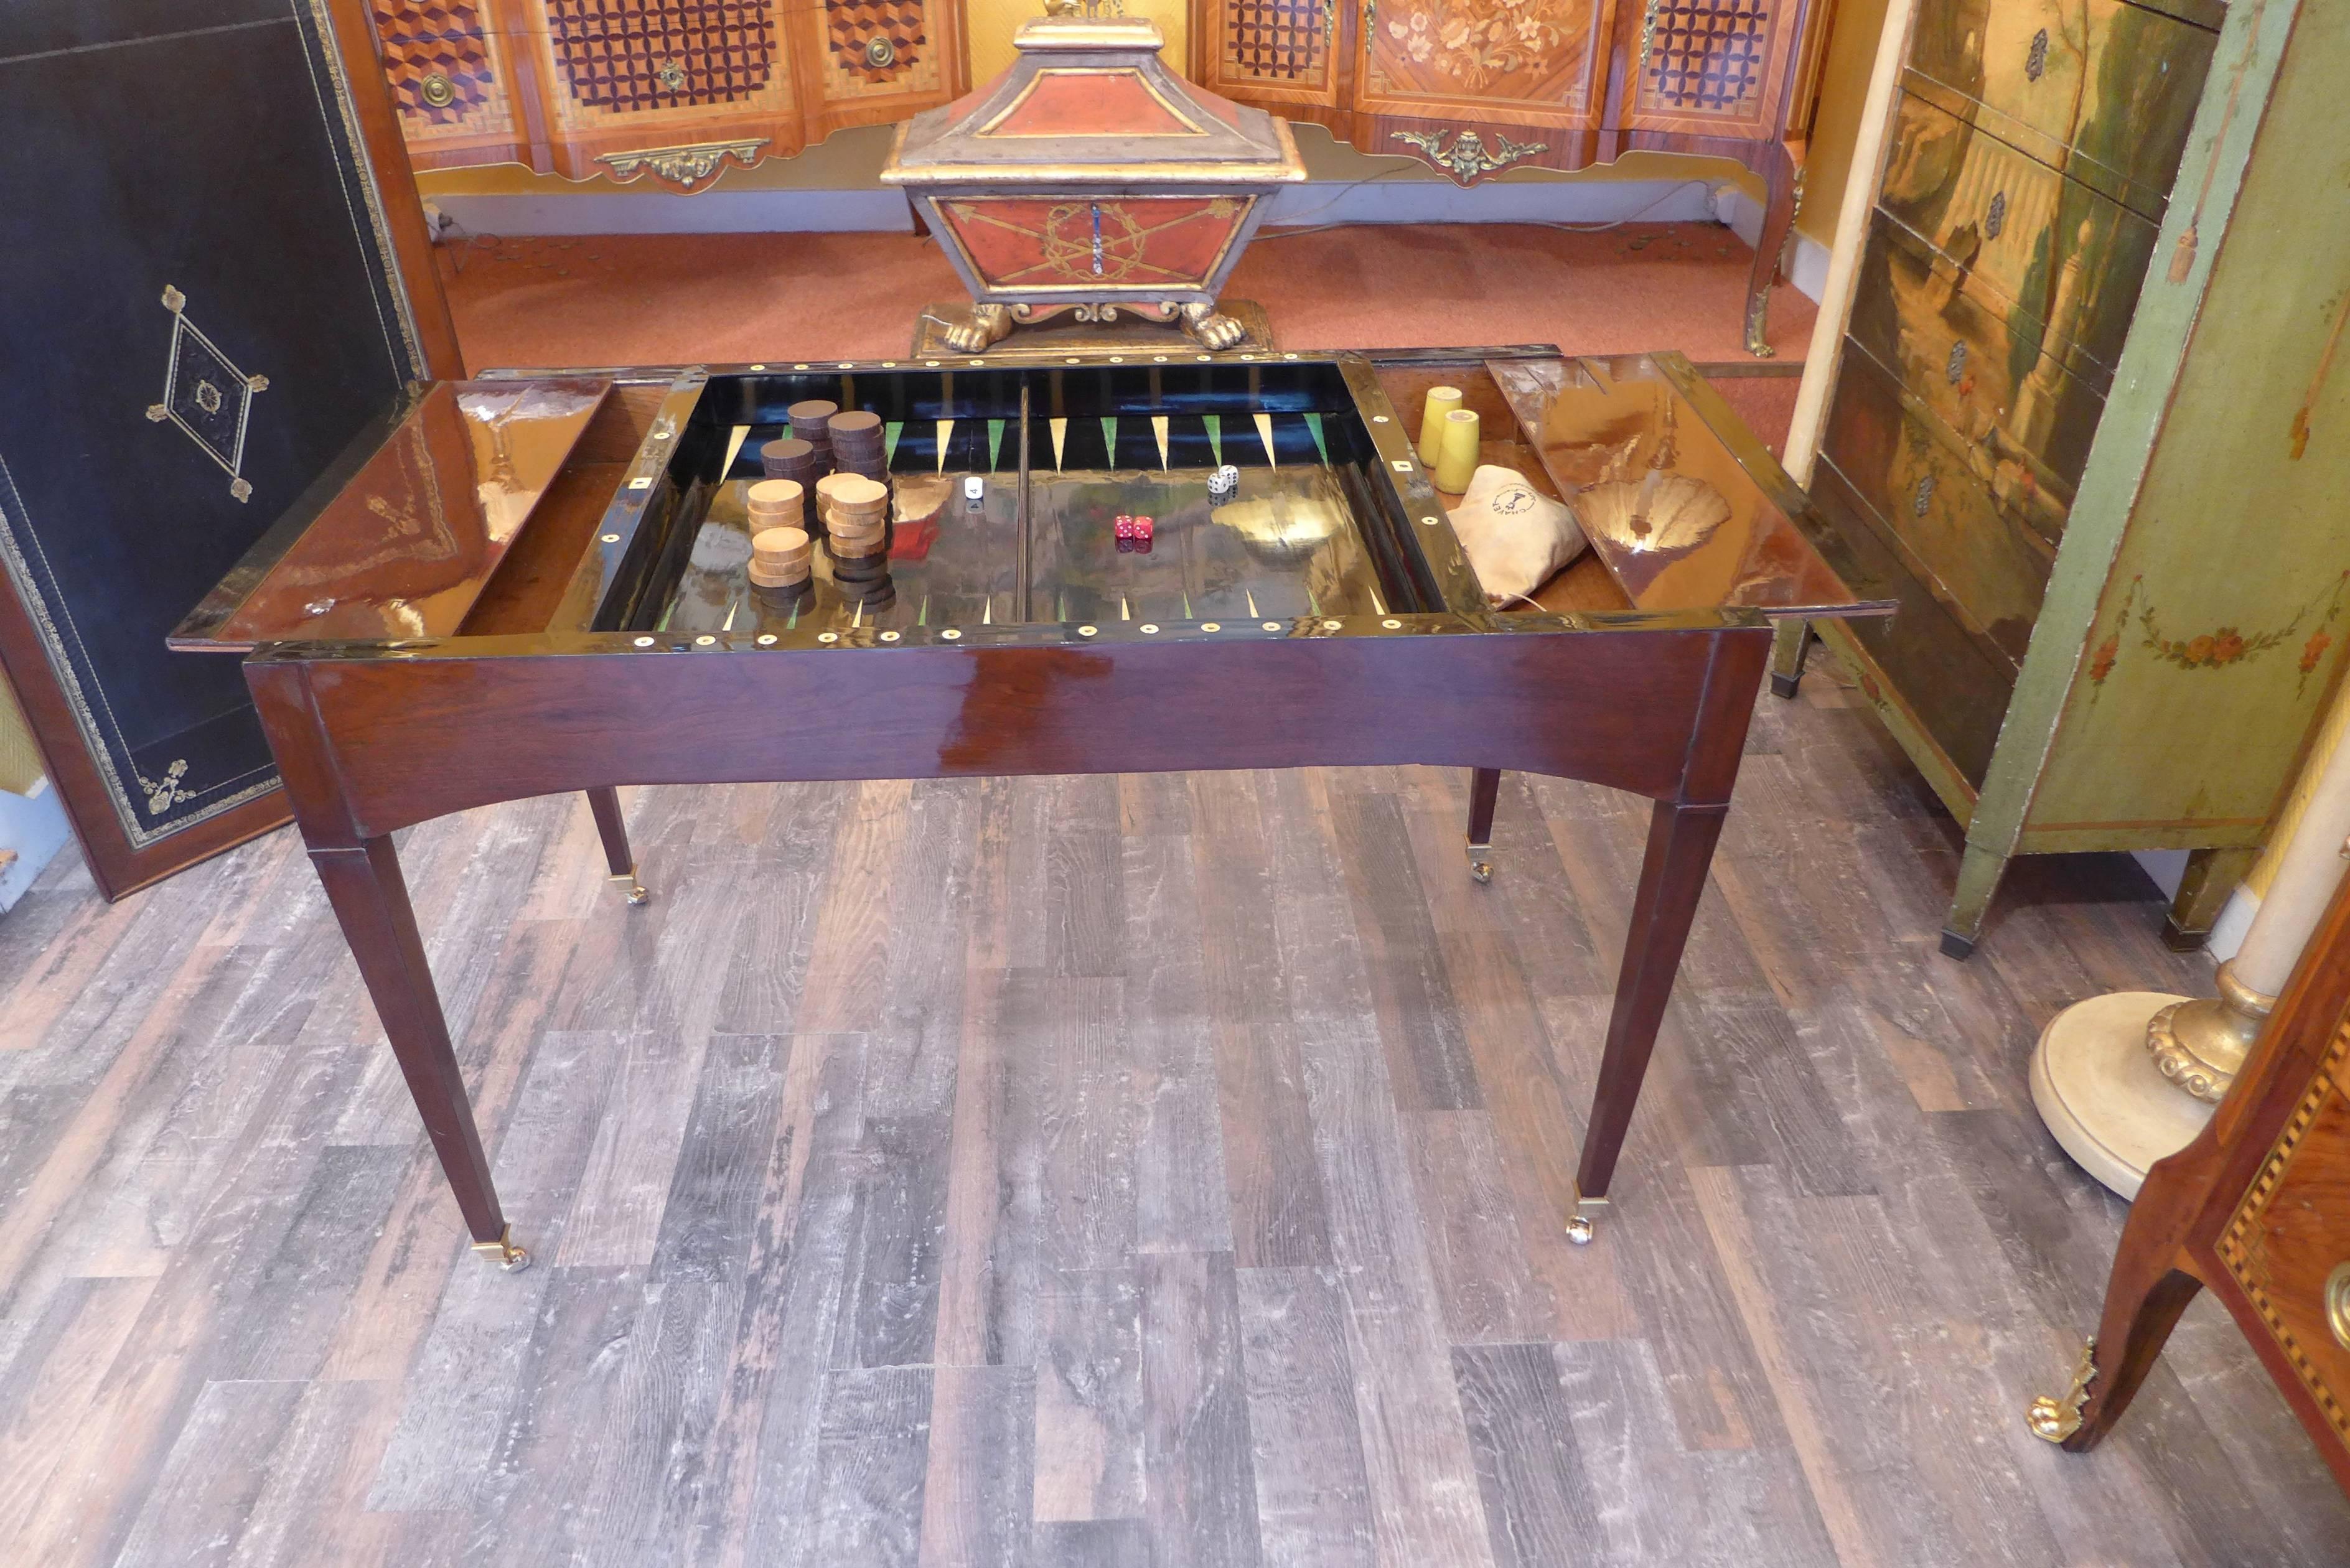 Polished French Directoire Period, circa 1795 Reversible Desk and Tric-Trac Game Table